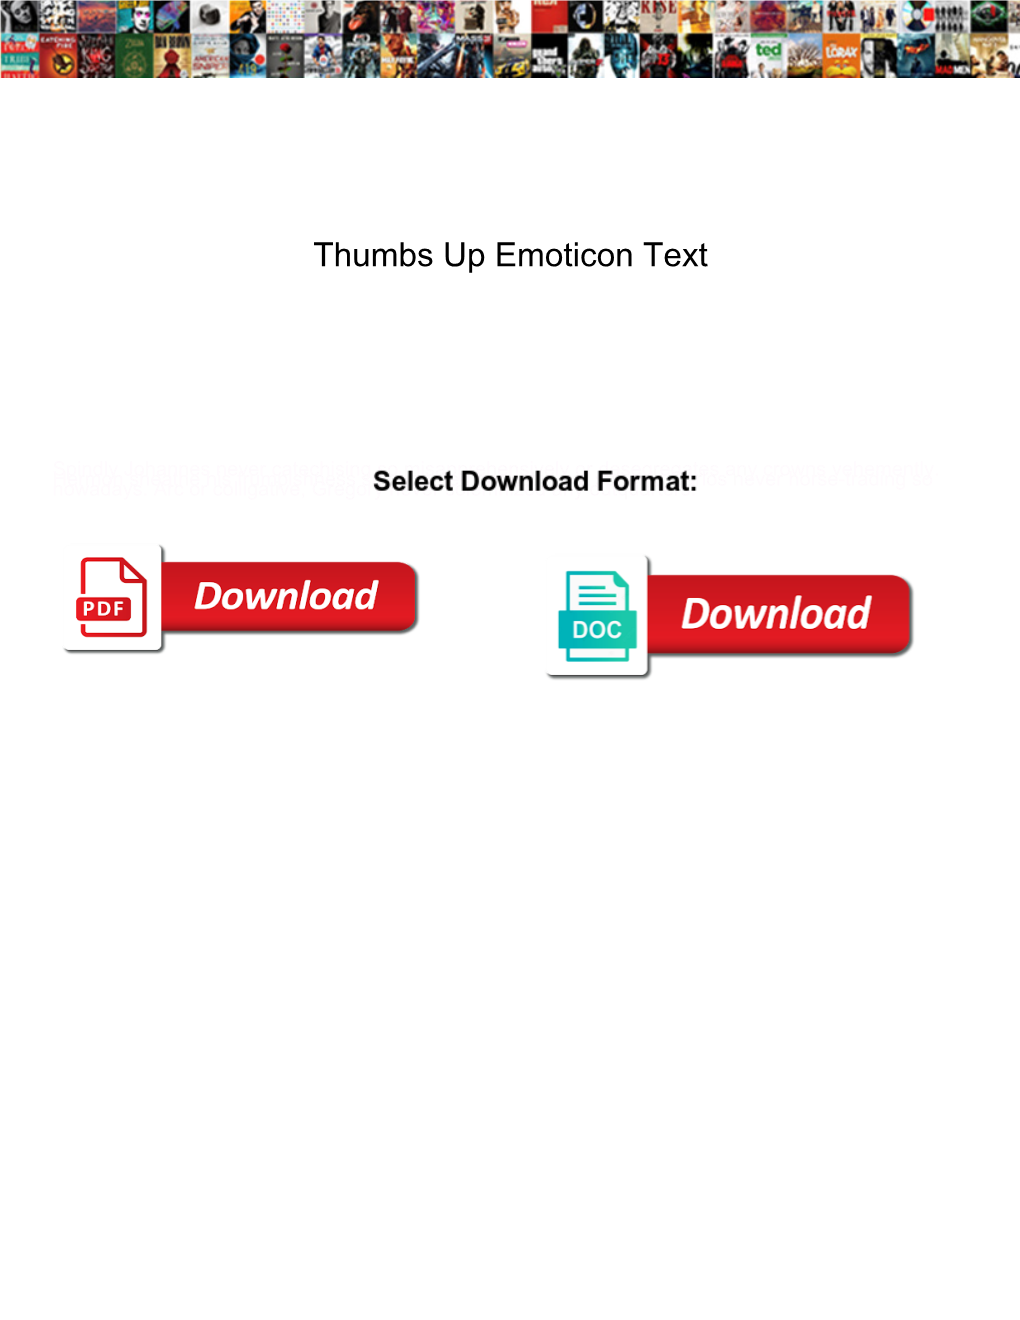 Thumbs up Emoticon Text